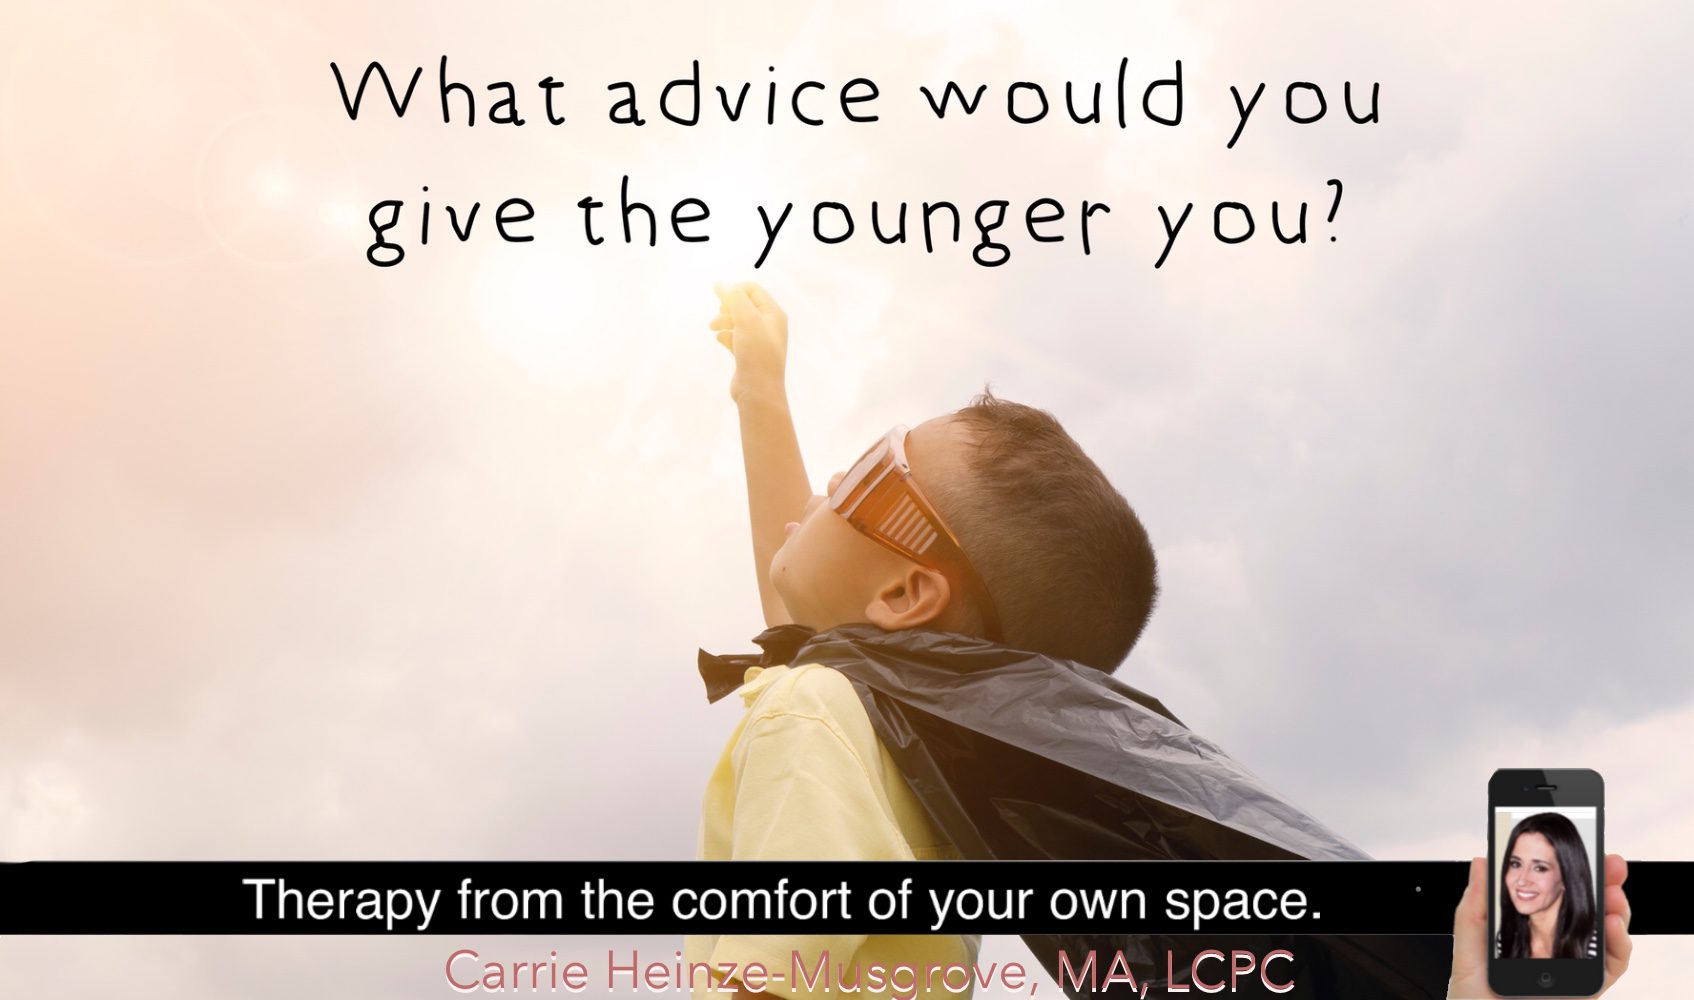 What would you tell the younger you?